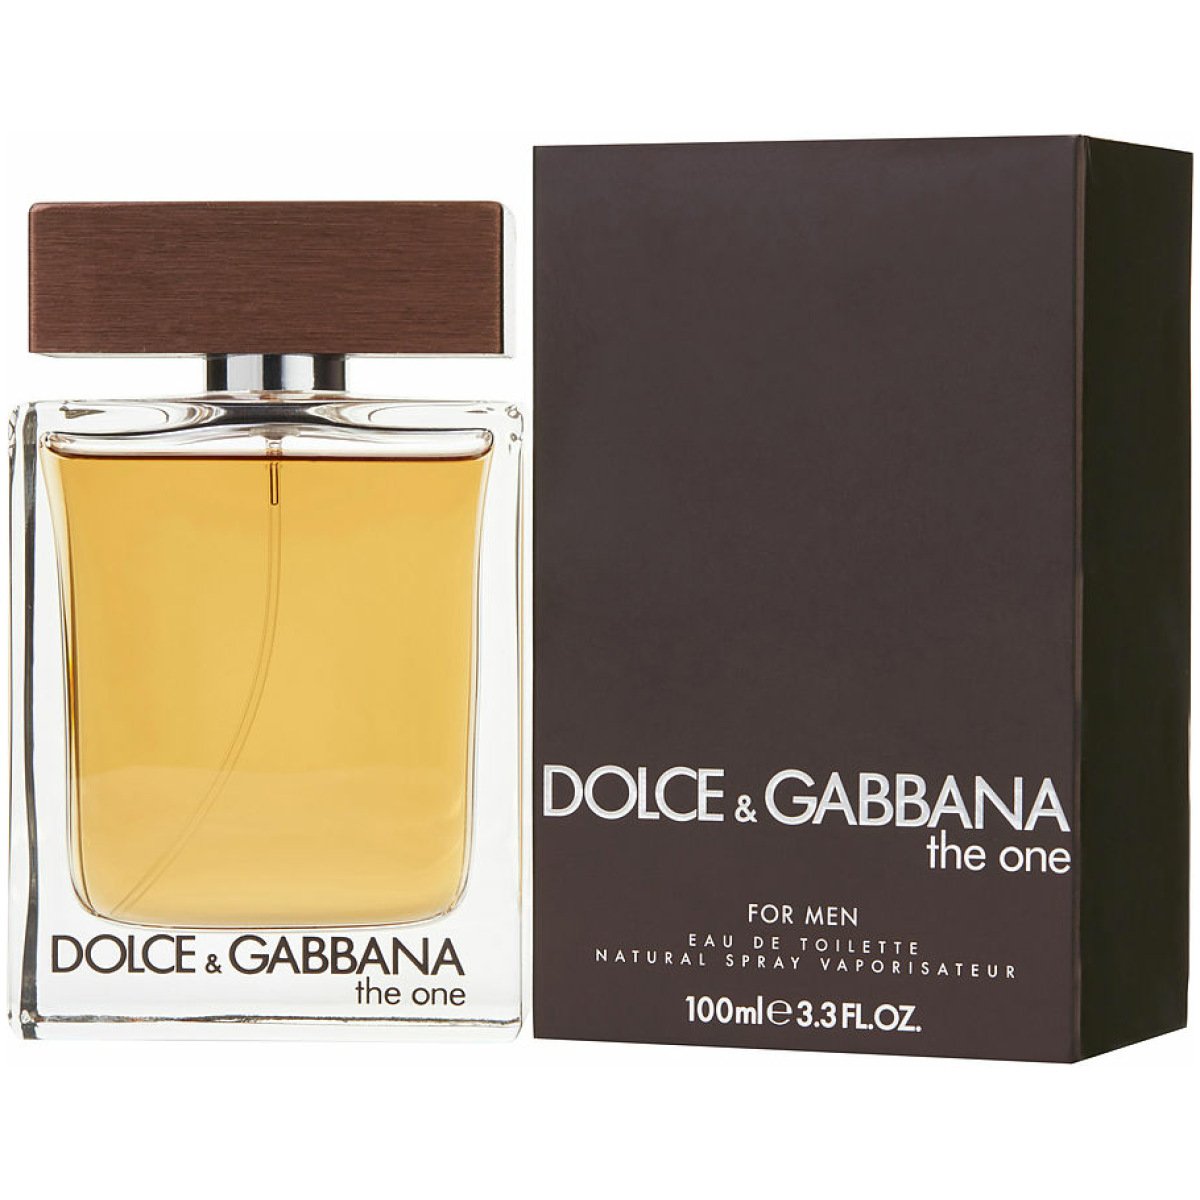 Dolce and Gabbana (D&G) the One EDT Perfume For Men 100ml